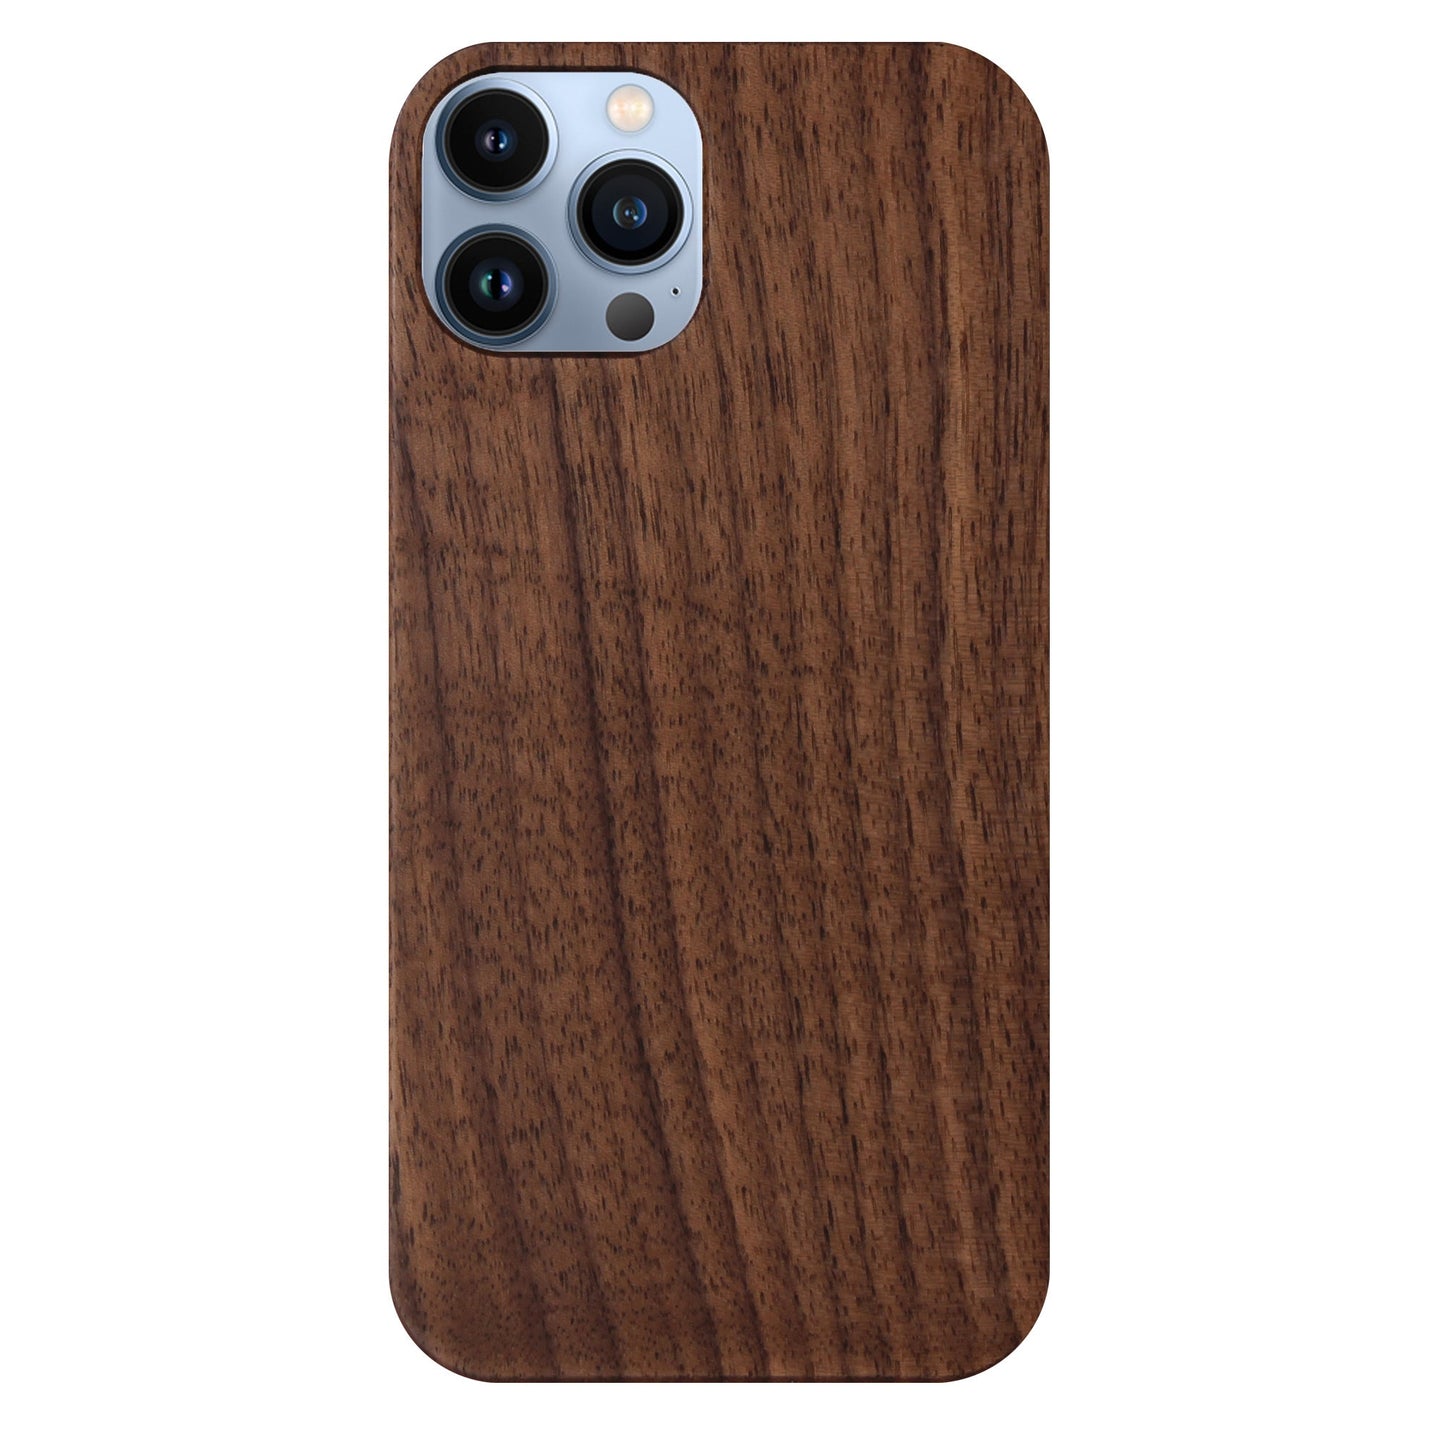 Eden case made of walnut wood for iPhone 13 Pro Max